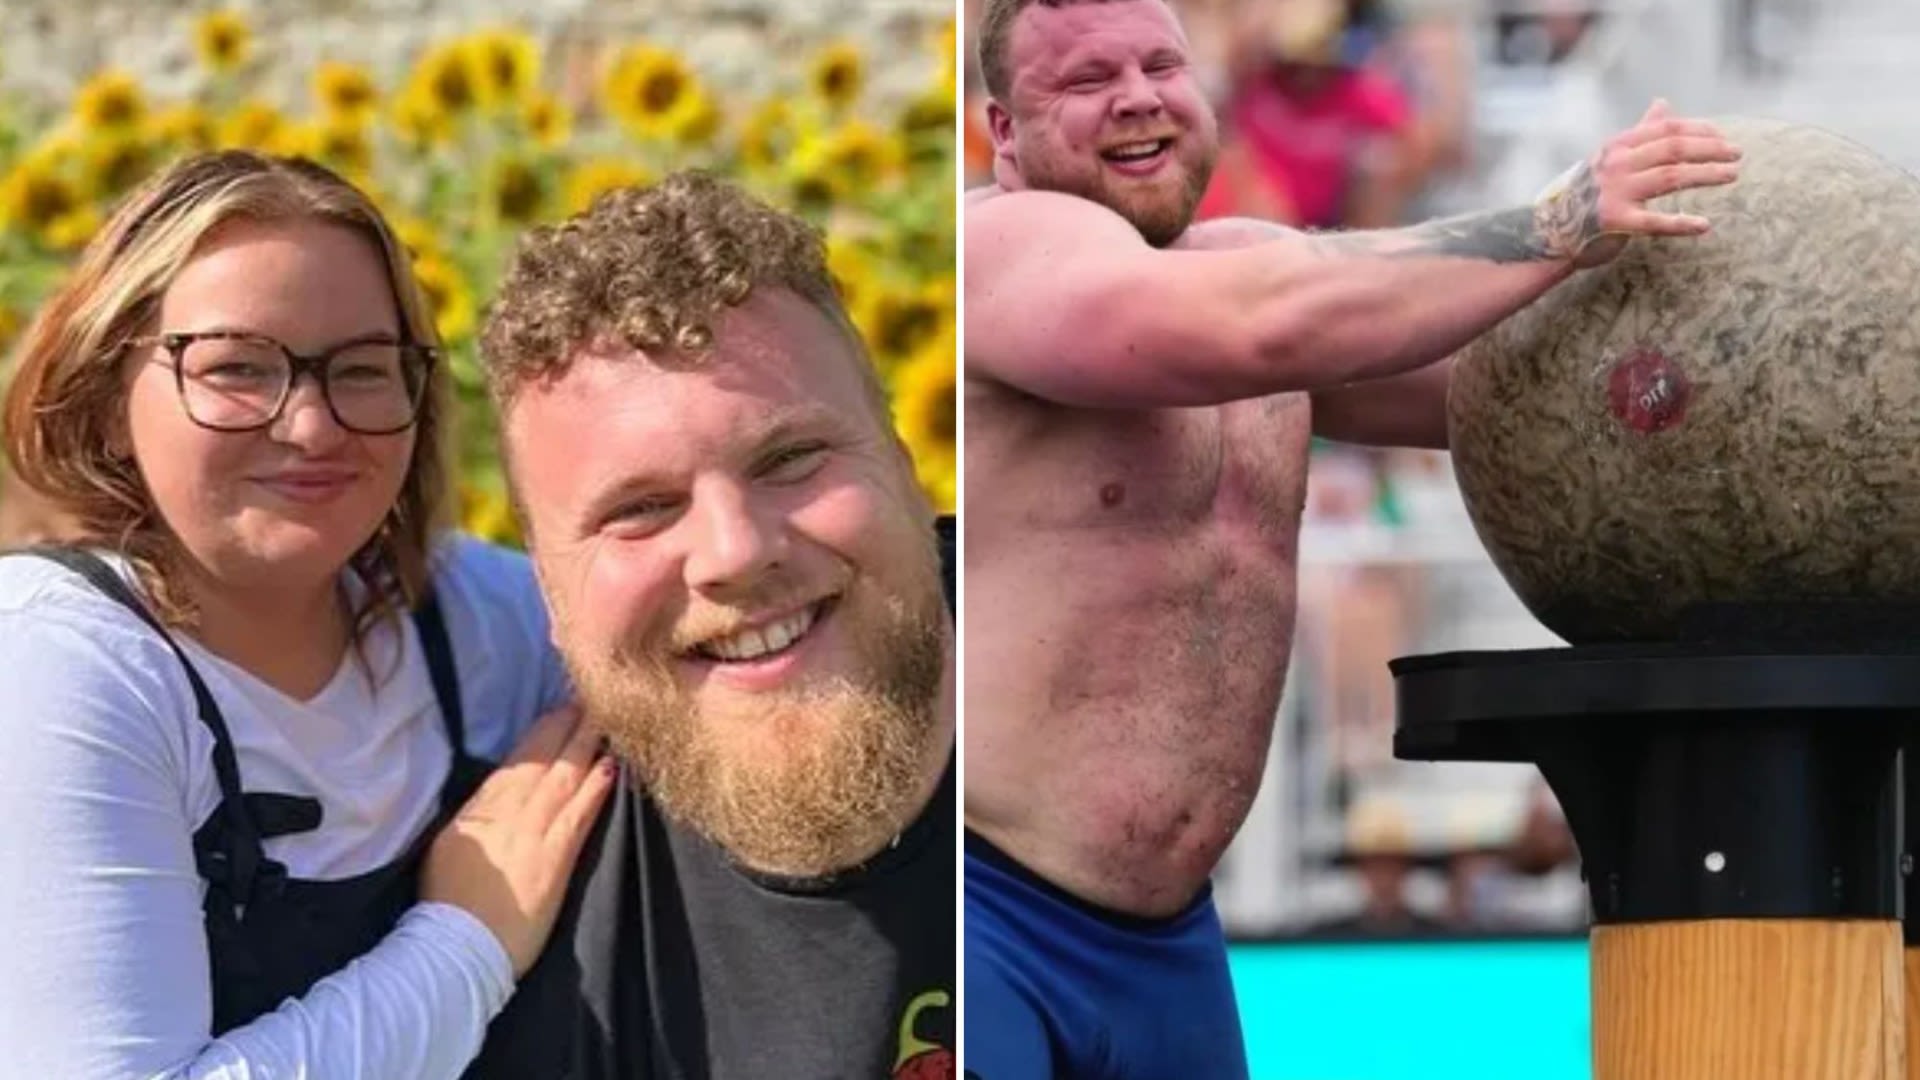 World's Strongest Man met his 5ft wife aged 17 after he was in 'dark place'